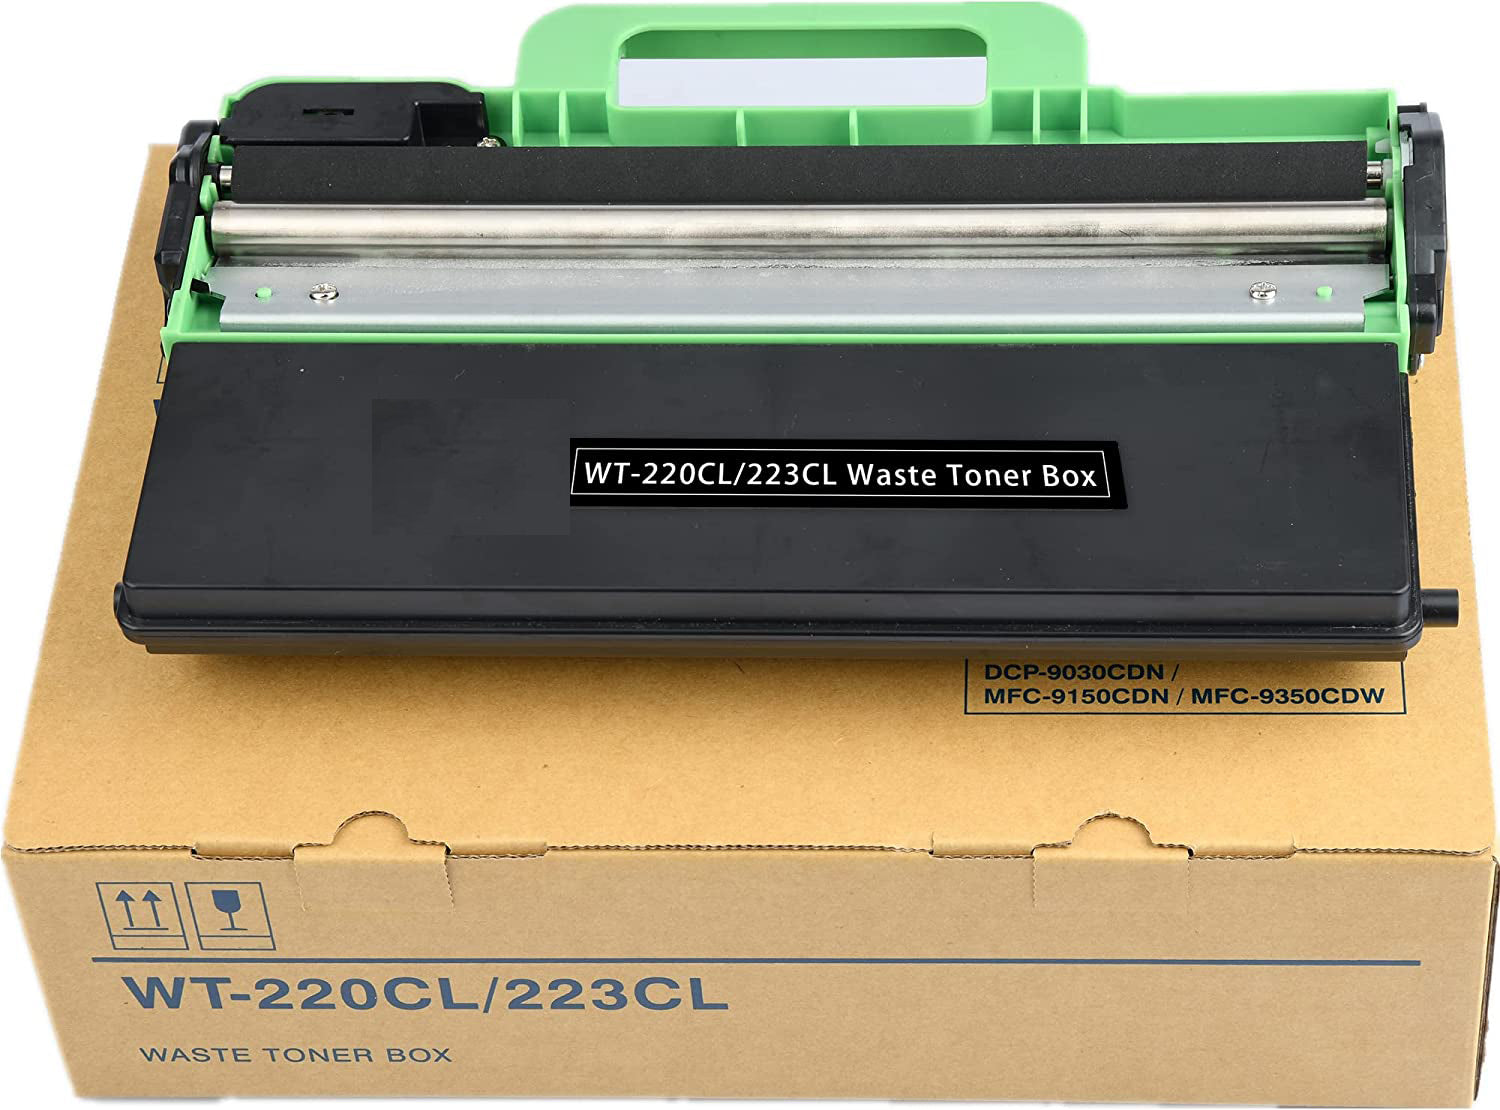 SKY Compatible WT-223CL  Waste Toner Box for L3551CDW and L3270CDW